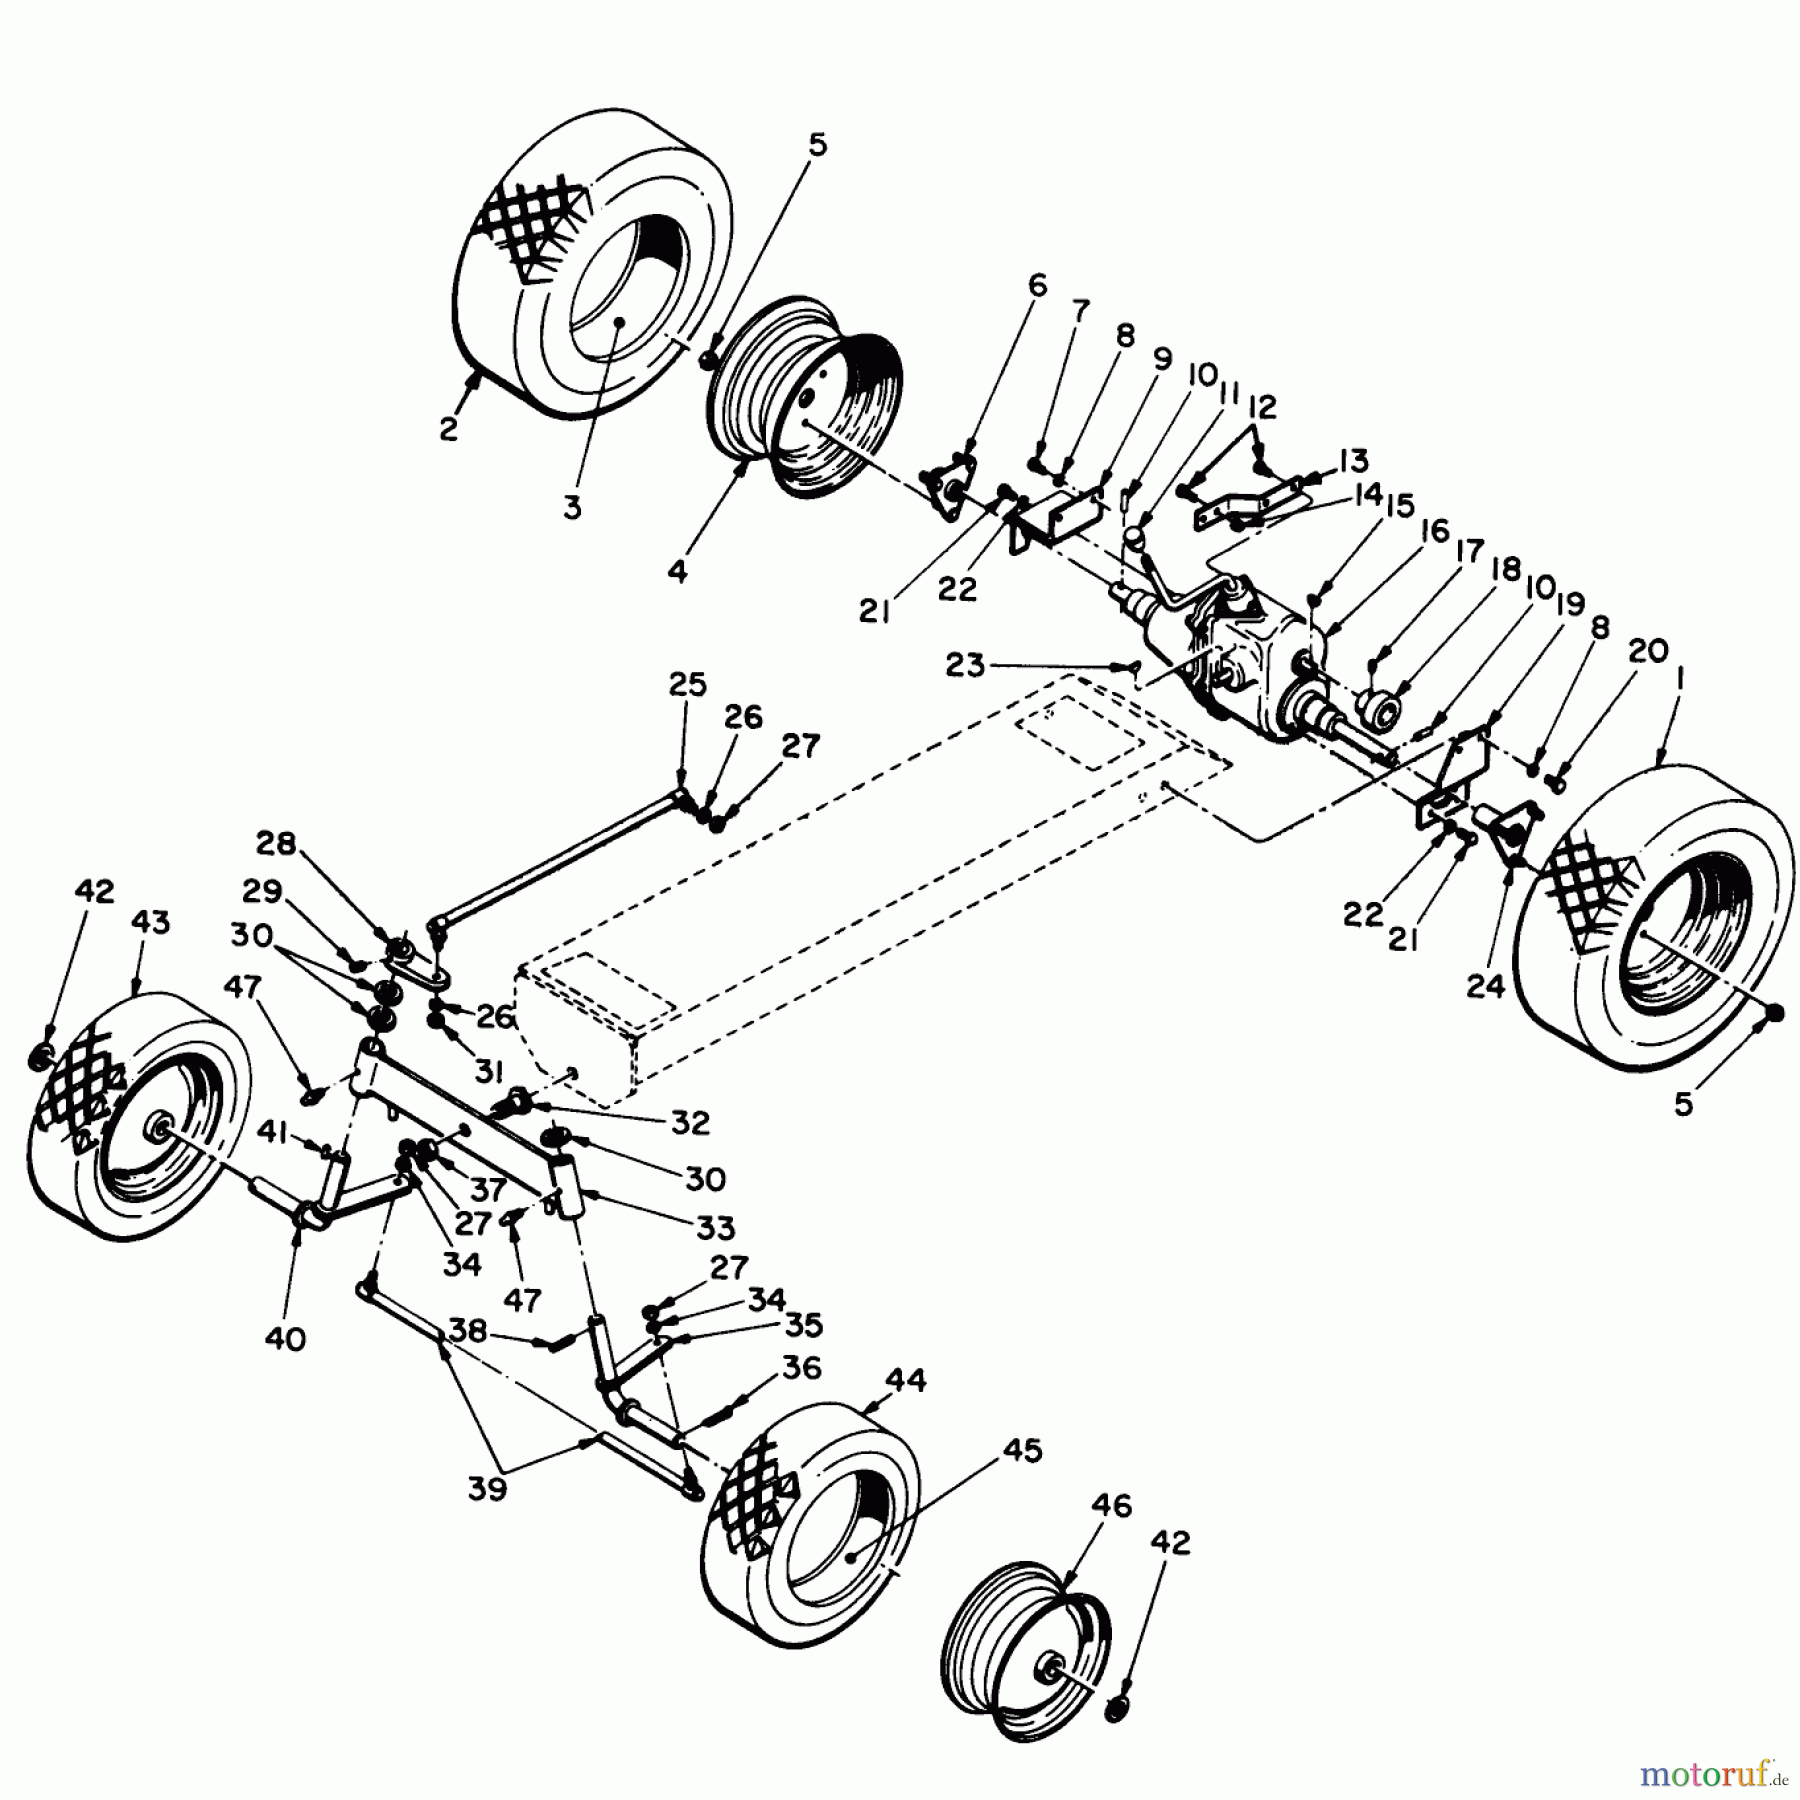  Toro Neu Mowers, Lawn & Garden Tractor Seite 1 55101 - Toro Compact Suburban Electric Lawn Tractor, 1968 (8000001-8999999) WHEEL AND AXLE ASSEMBLY